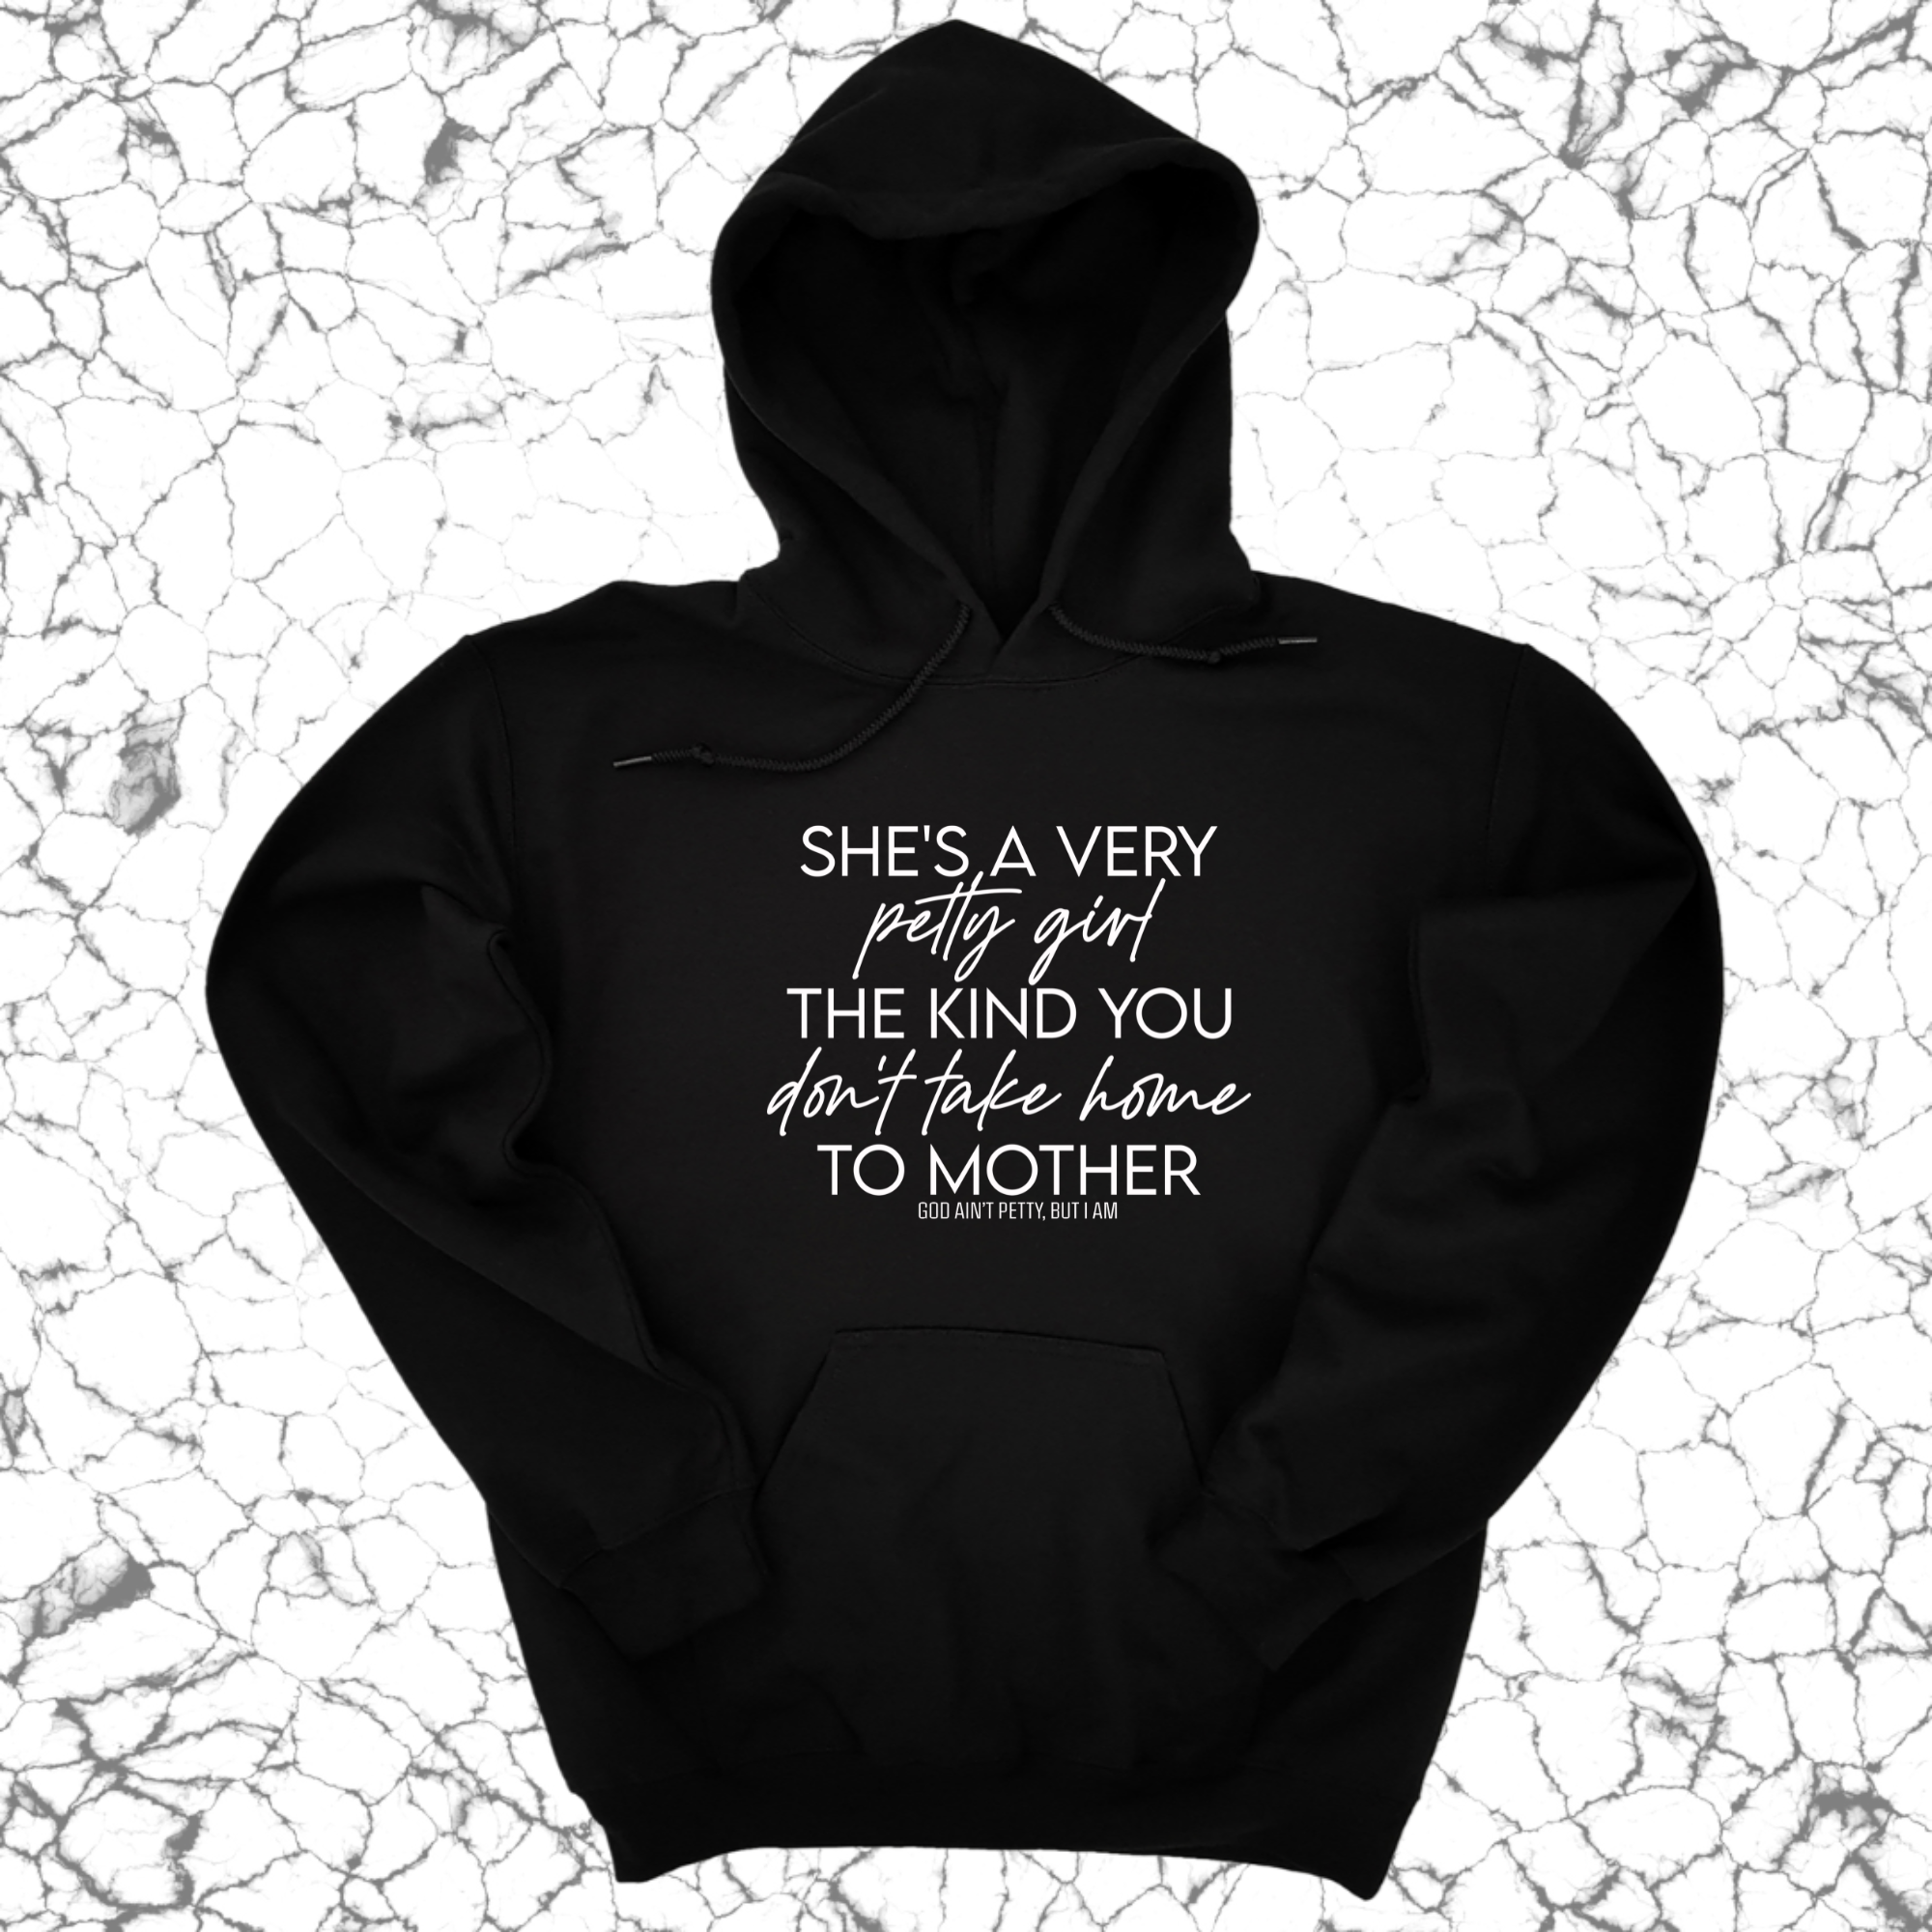 She's a very petty girl the kind you don't take home to mother Unisex Hoodie-Hoodie-The Original God Ain't Petty But I Am